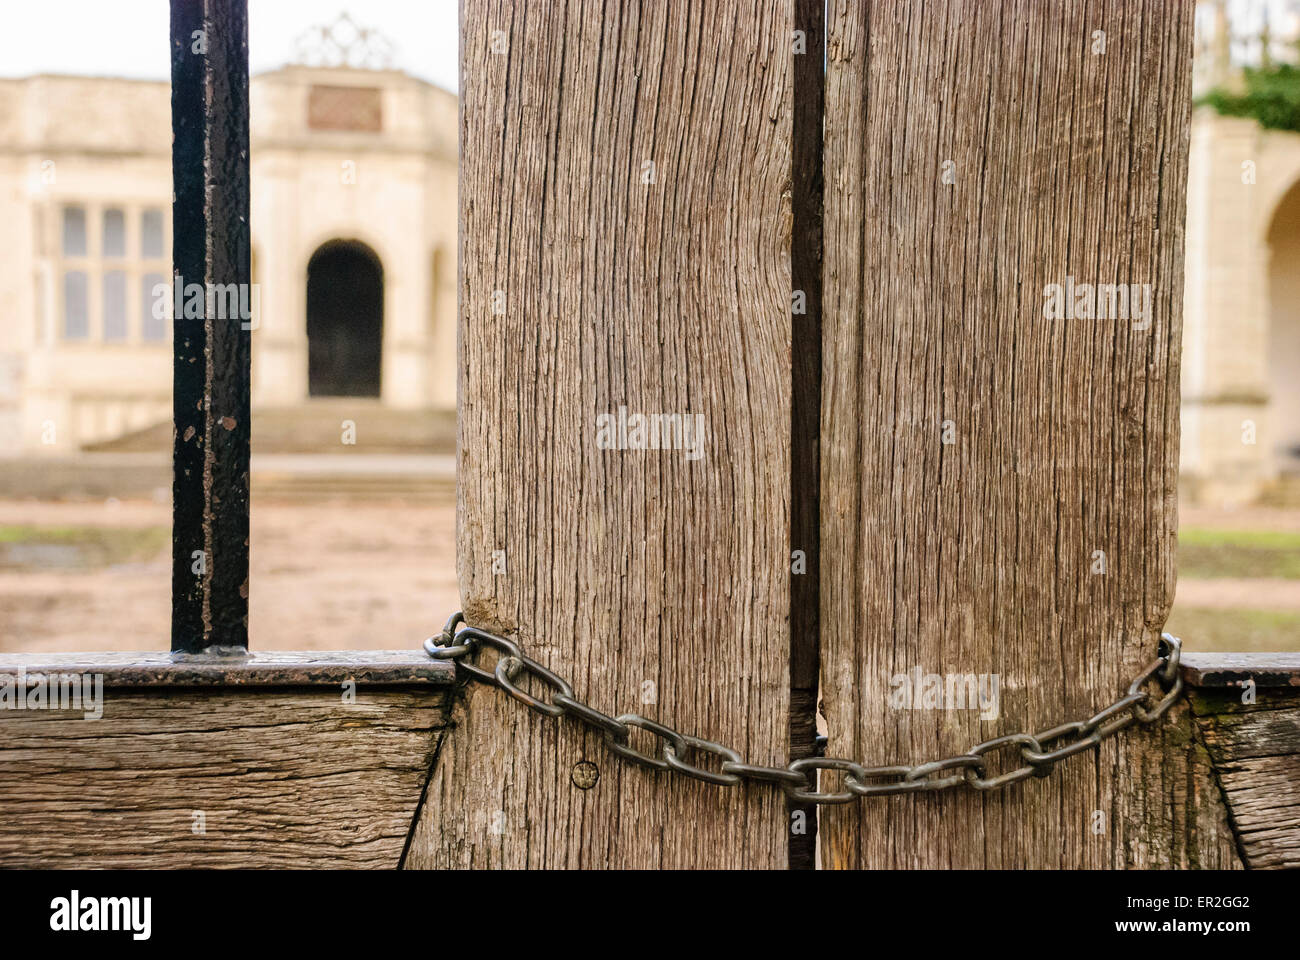 Chain locking a wooden gate outside a building. Stock Photo